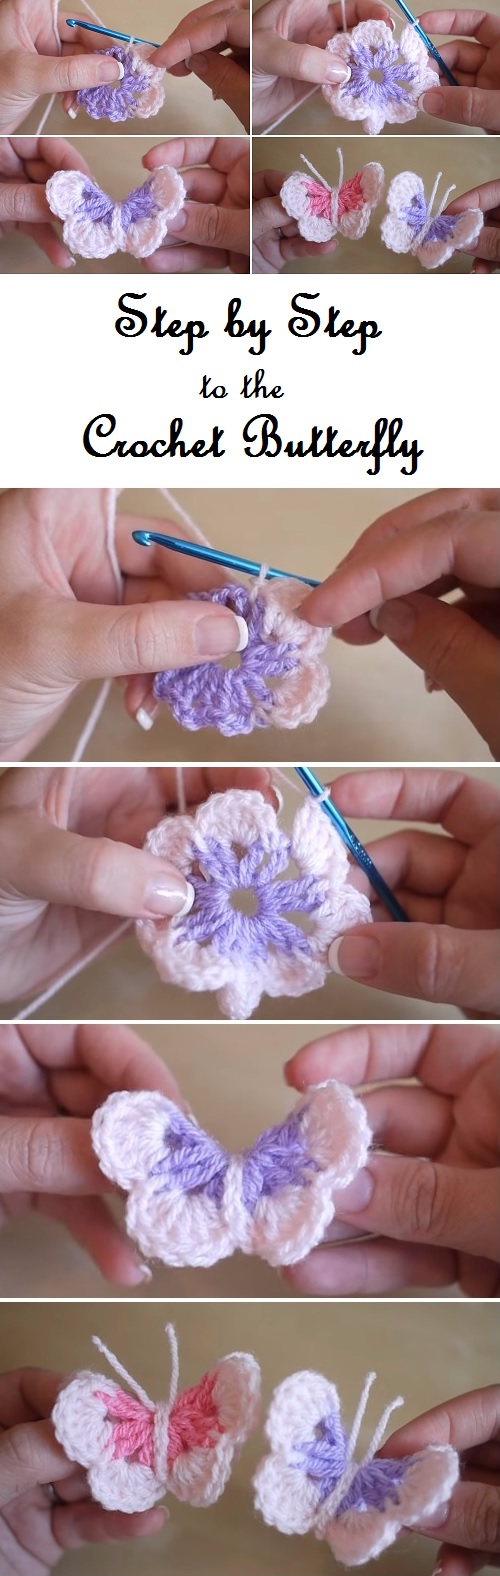 Crochet Butterfly - Step by Step tutorial